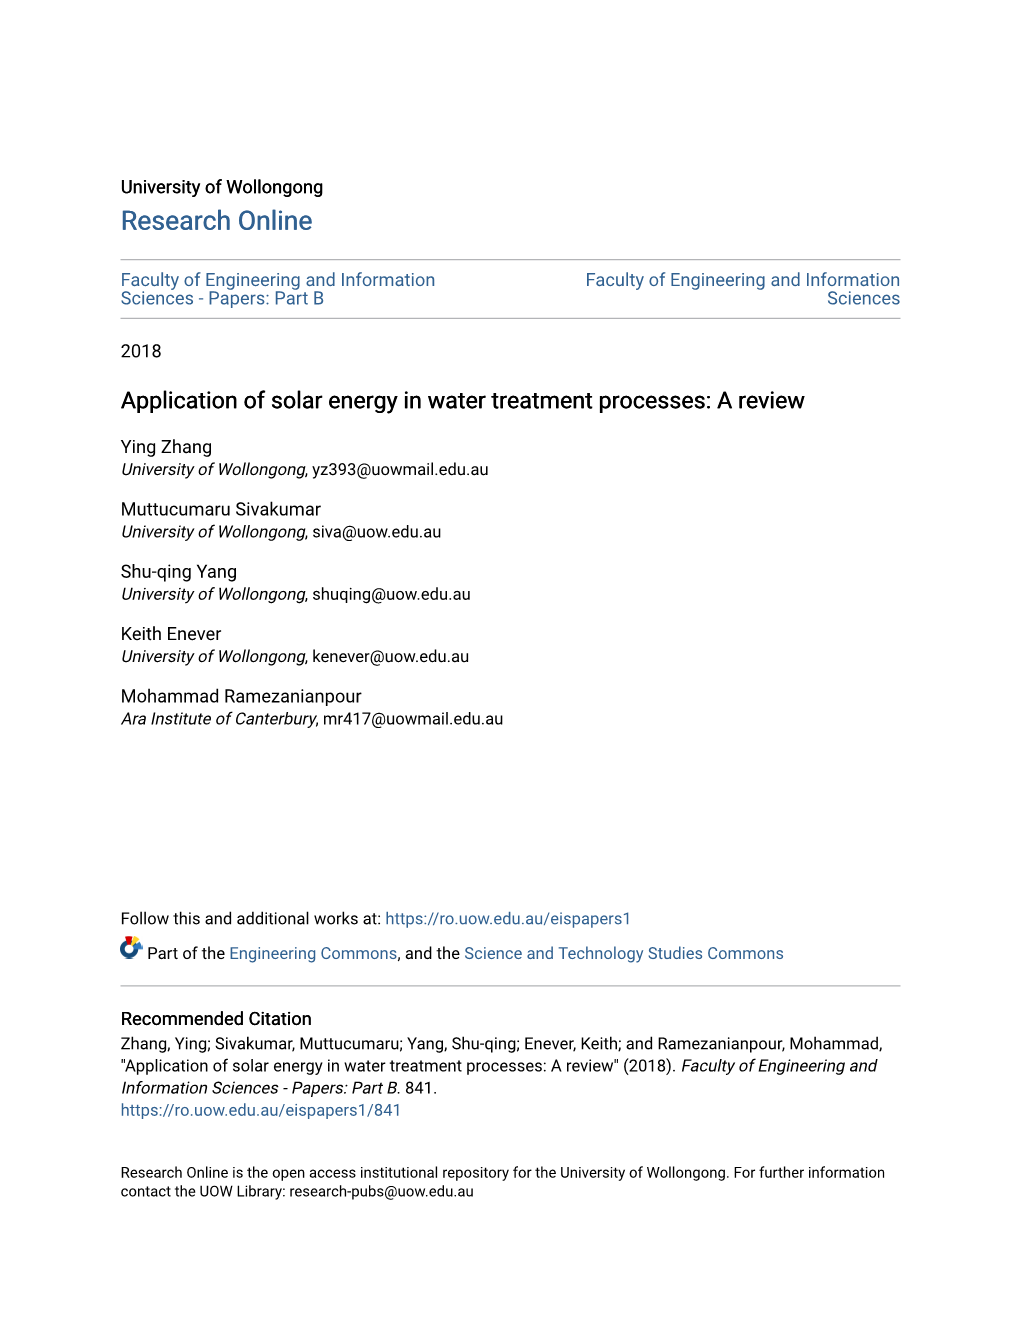 Application of Solar Energy in Water Treatment Processes: a Review